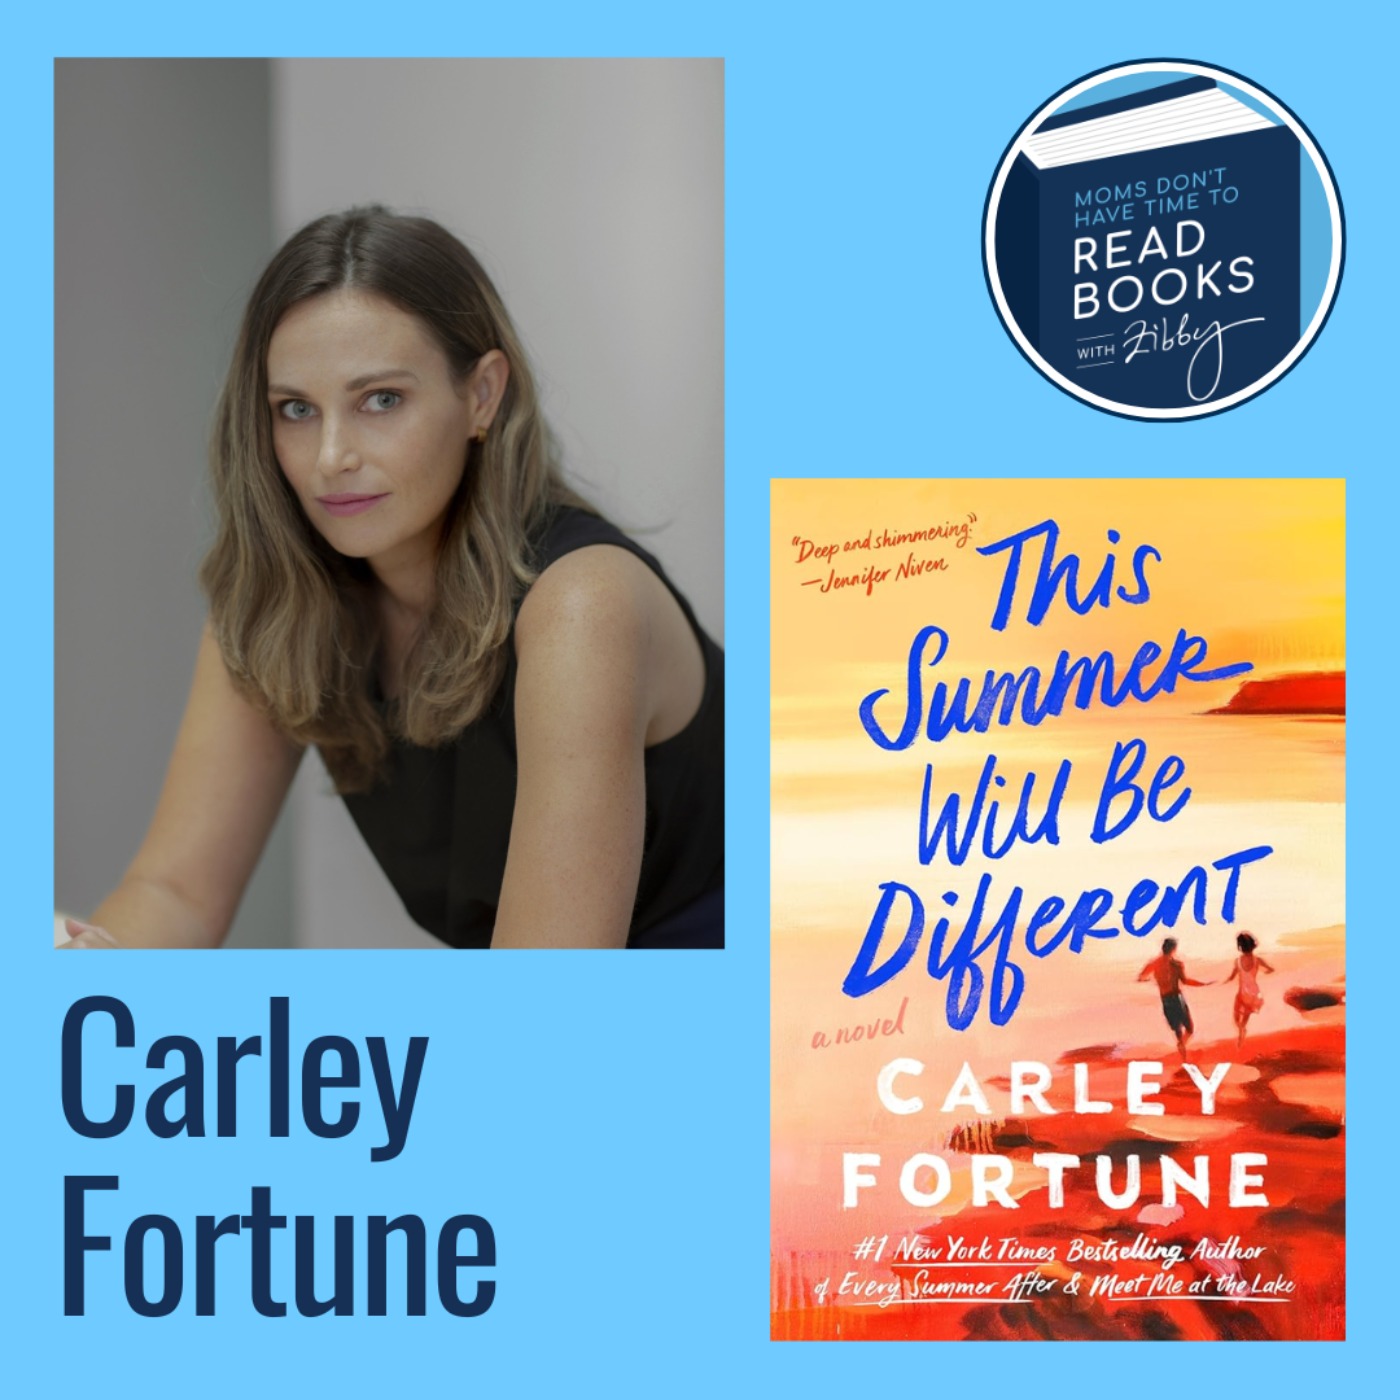 #1 NYT Bestseller! Carley Fortune, THIS SUMMER WILL BE DIFFERENT